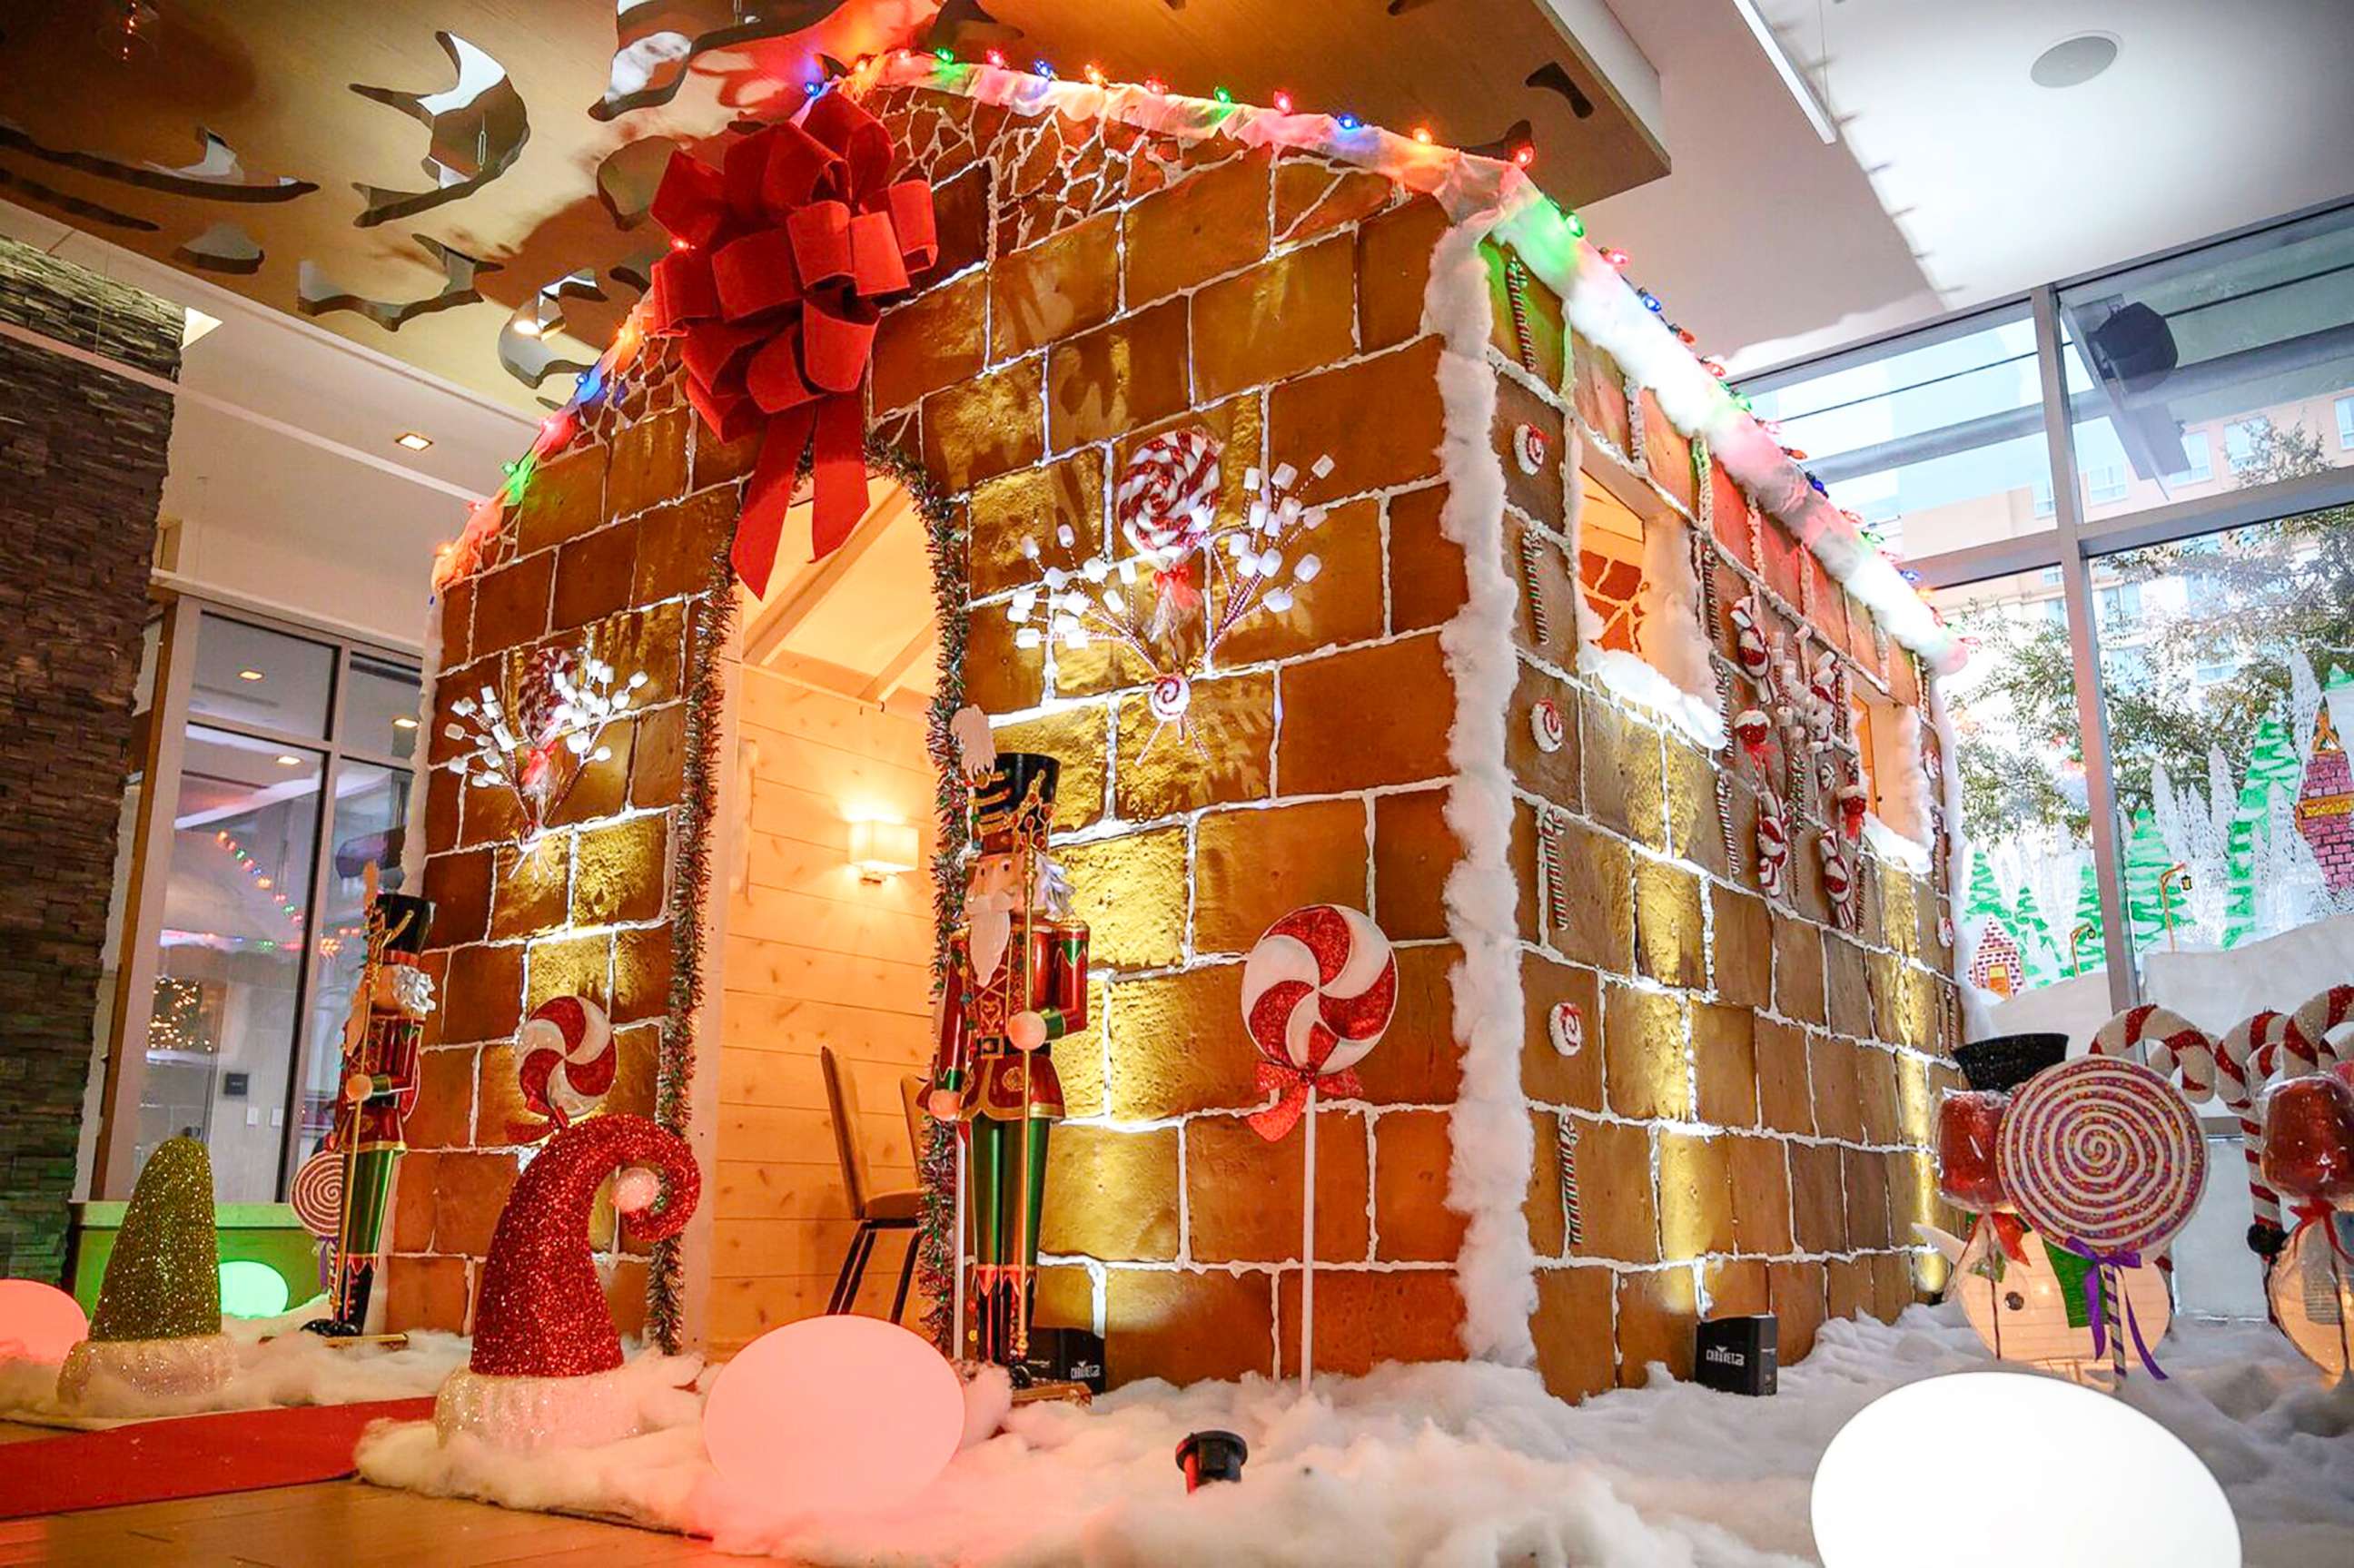 PHOTO: The team at Westin Austin's Stella San Jac restaurant began building the gingerbread house in October.